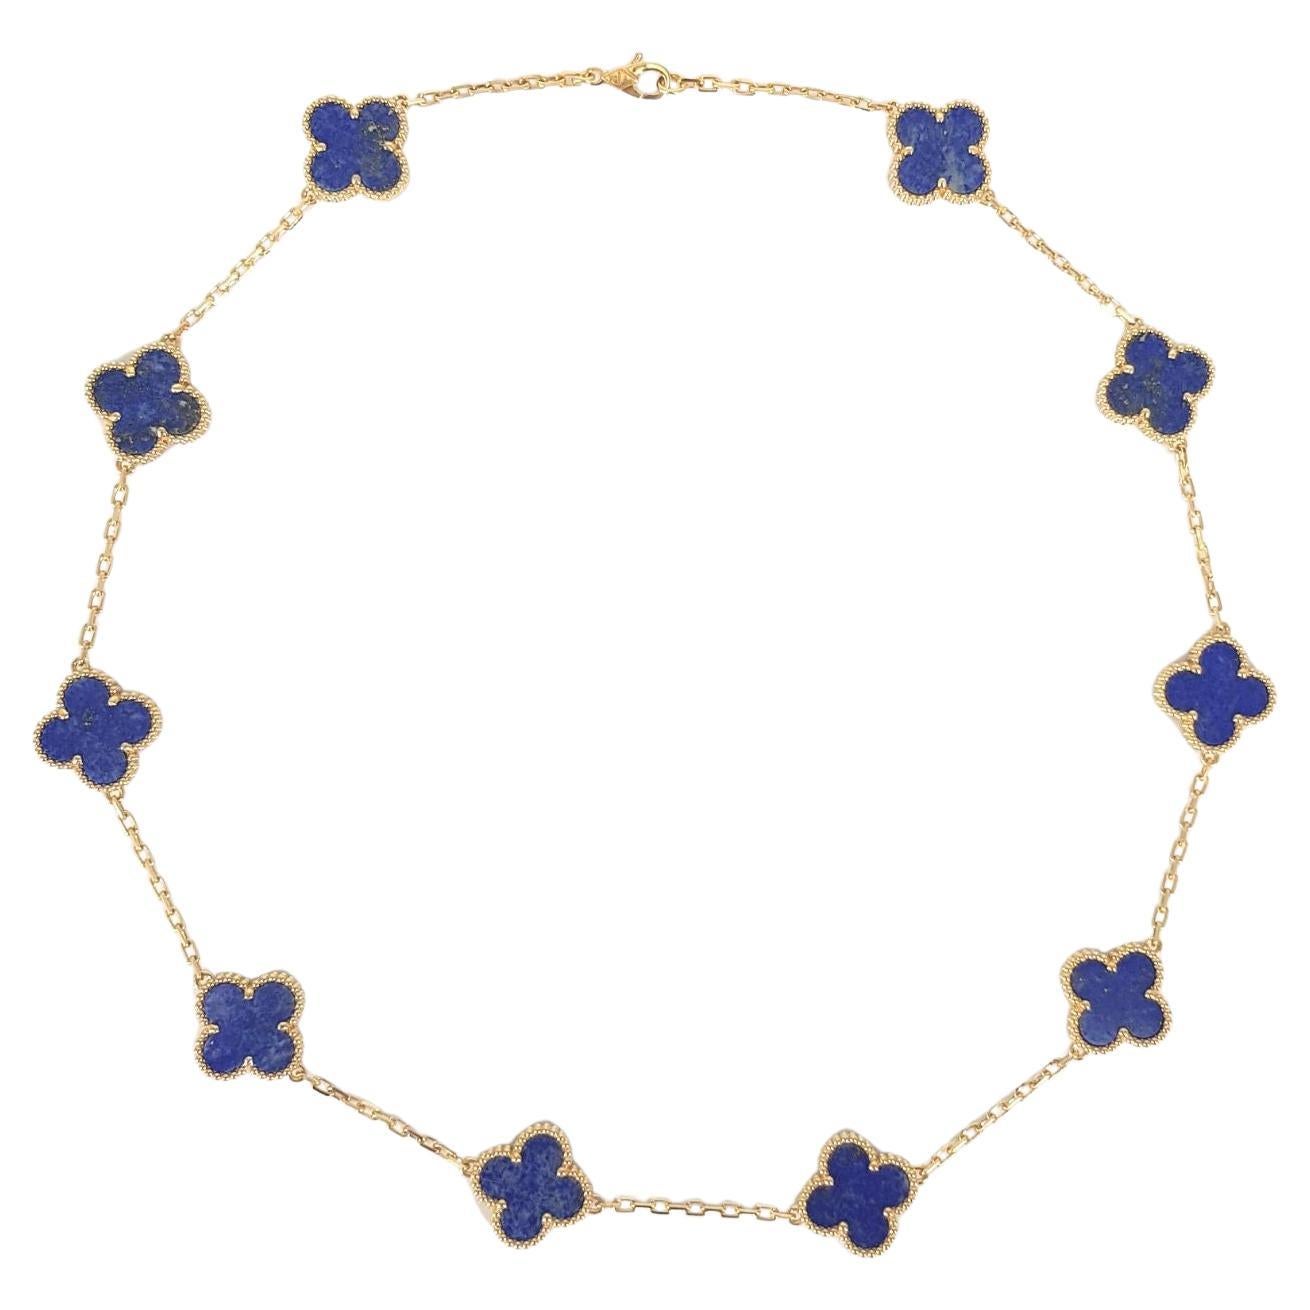 18CT Yellow Gold Van Cleef and Arpels Lapis Necklace